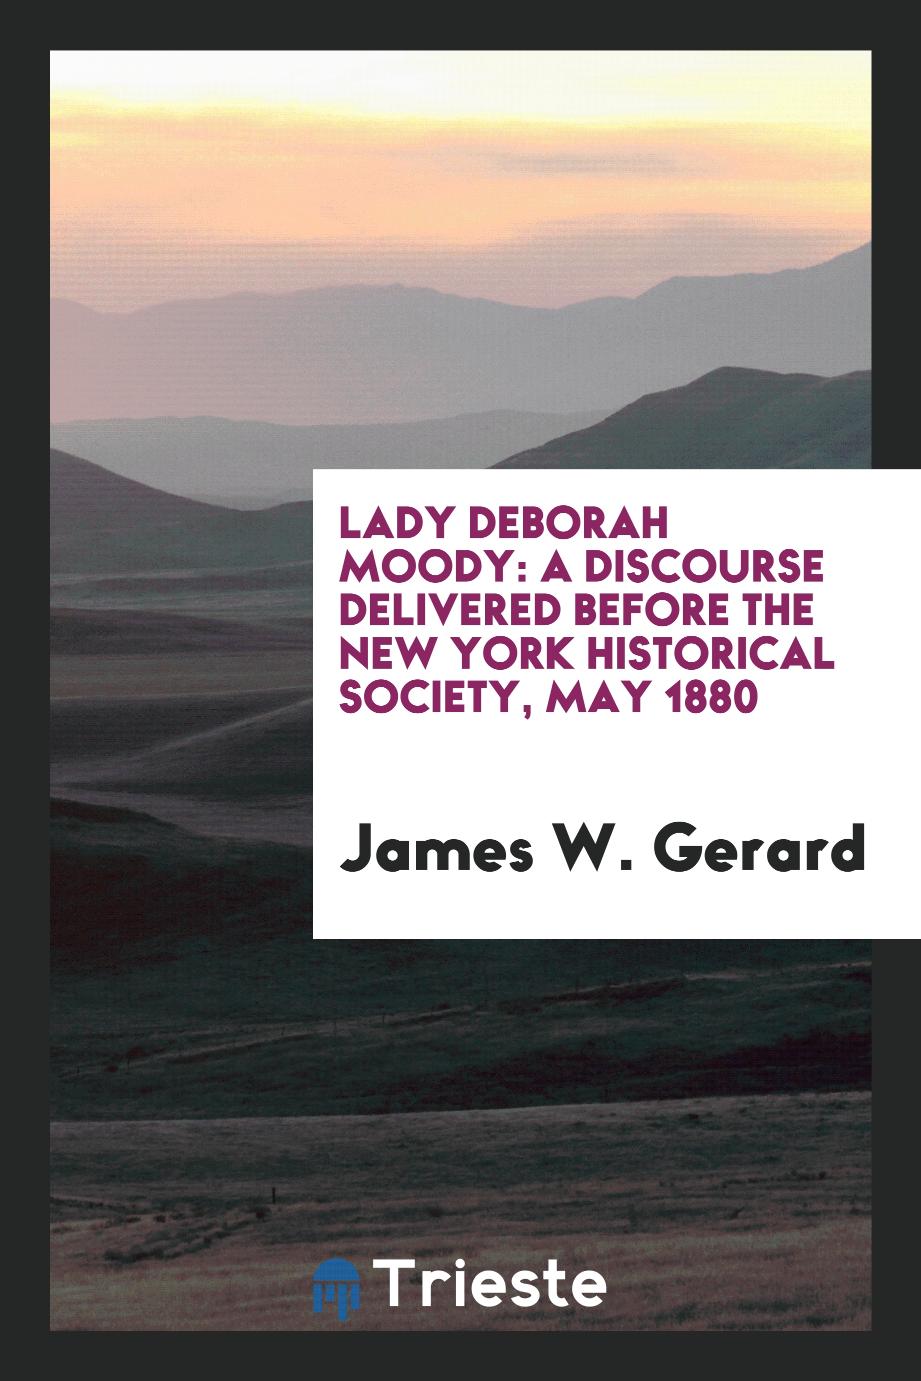 Lady Deborah Moody: A Discourse Delivered Before the New York Historical Society, May 1880